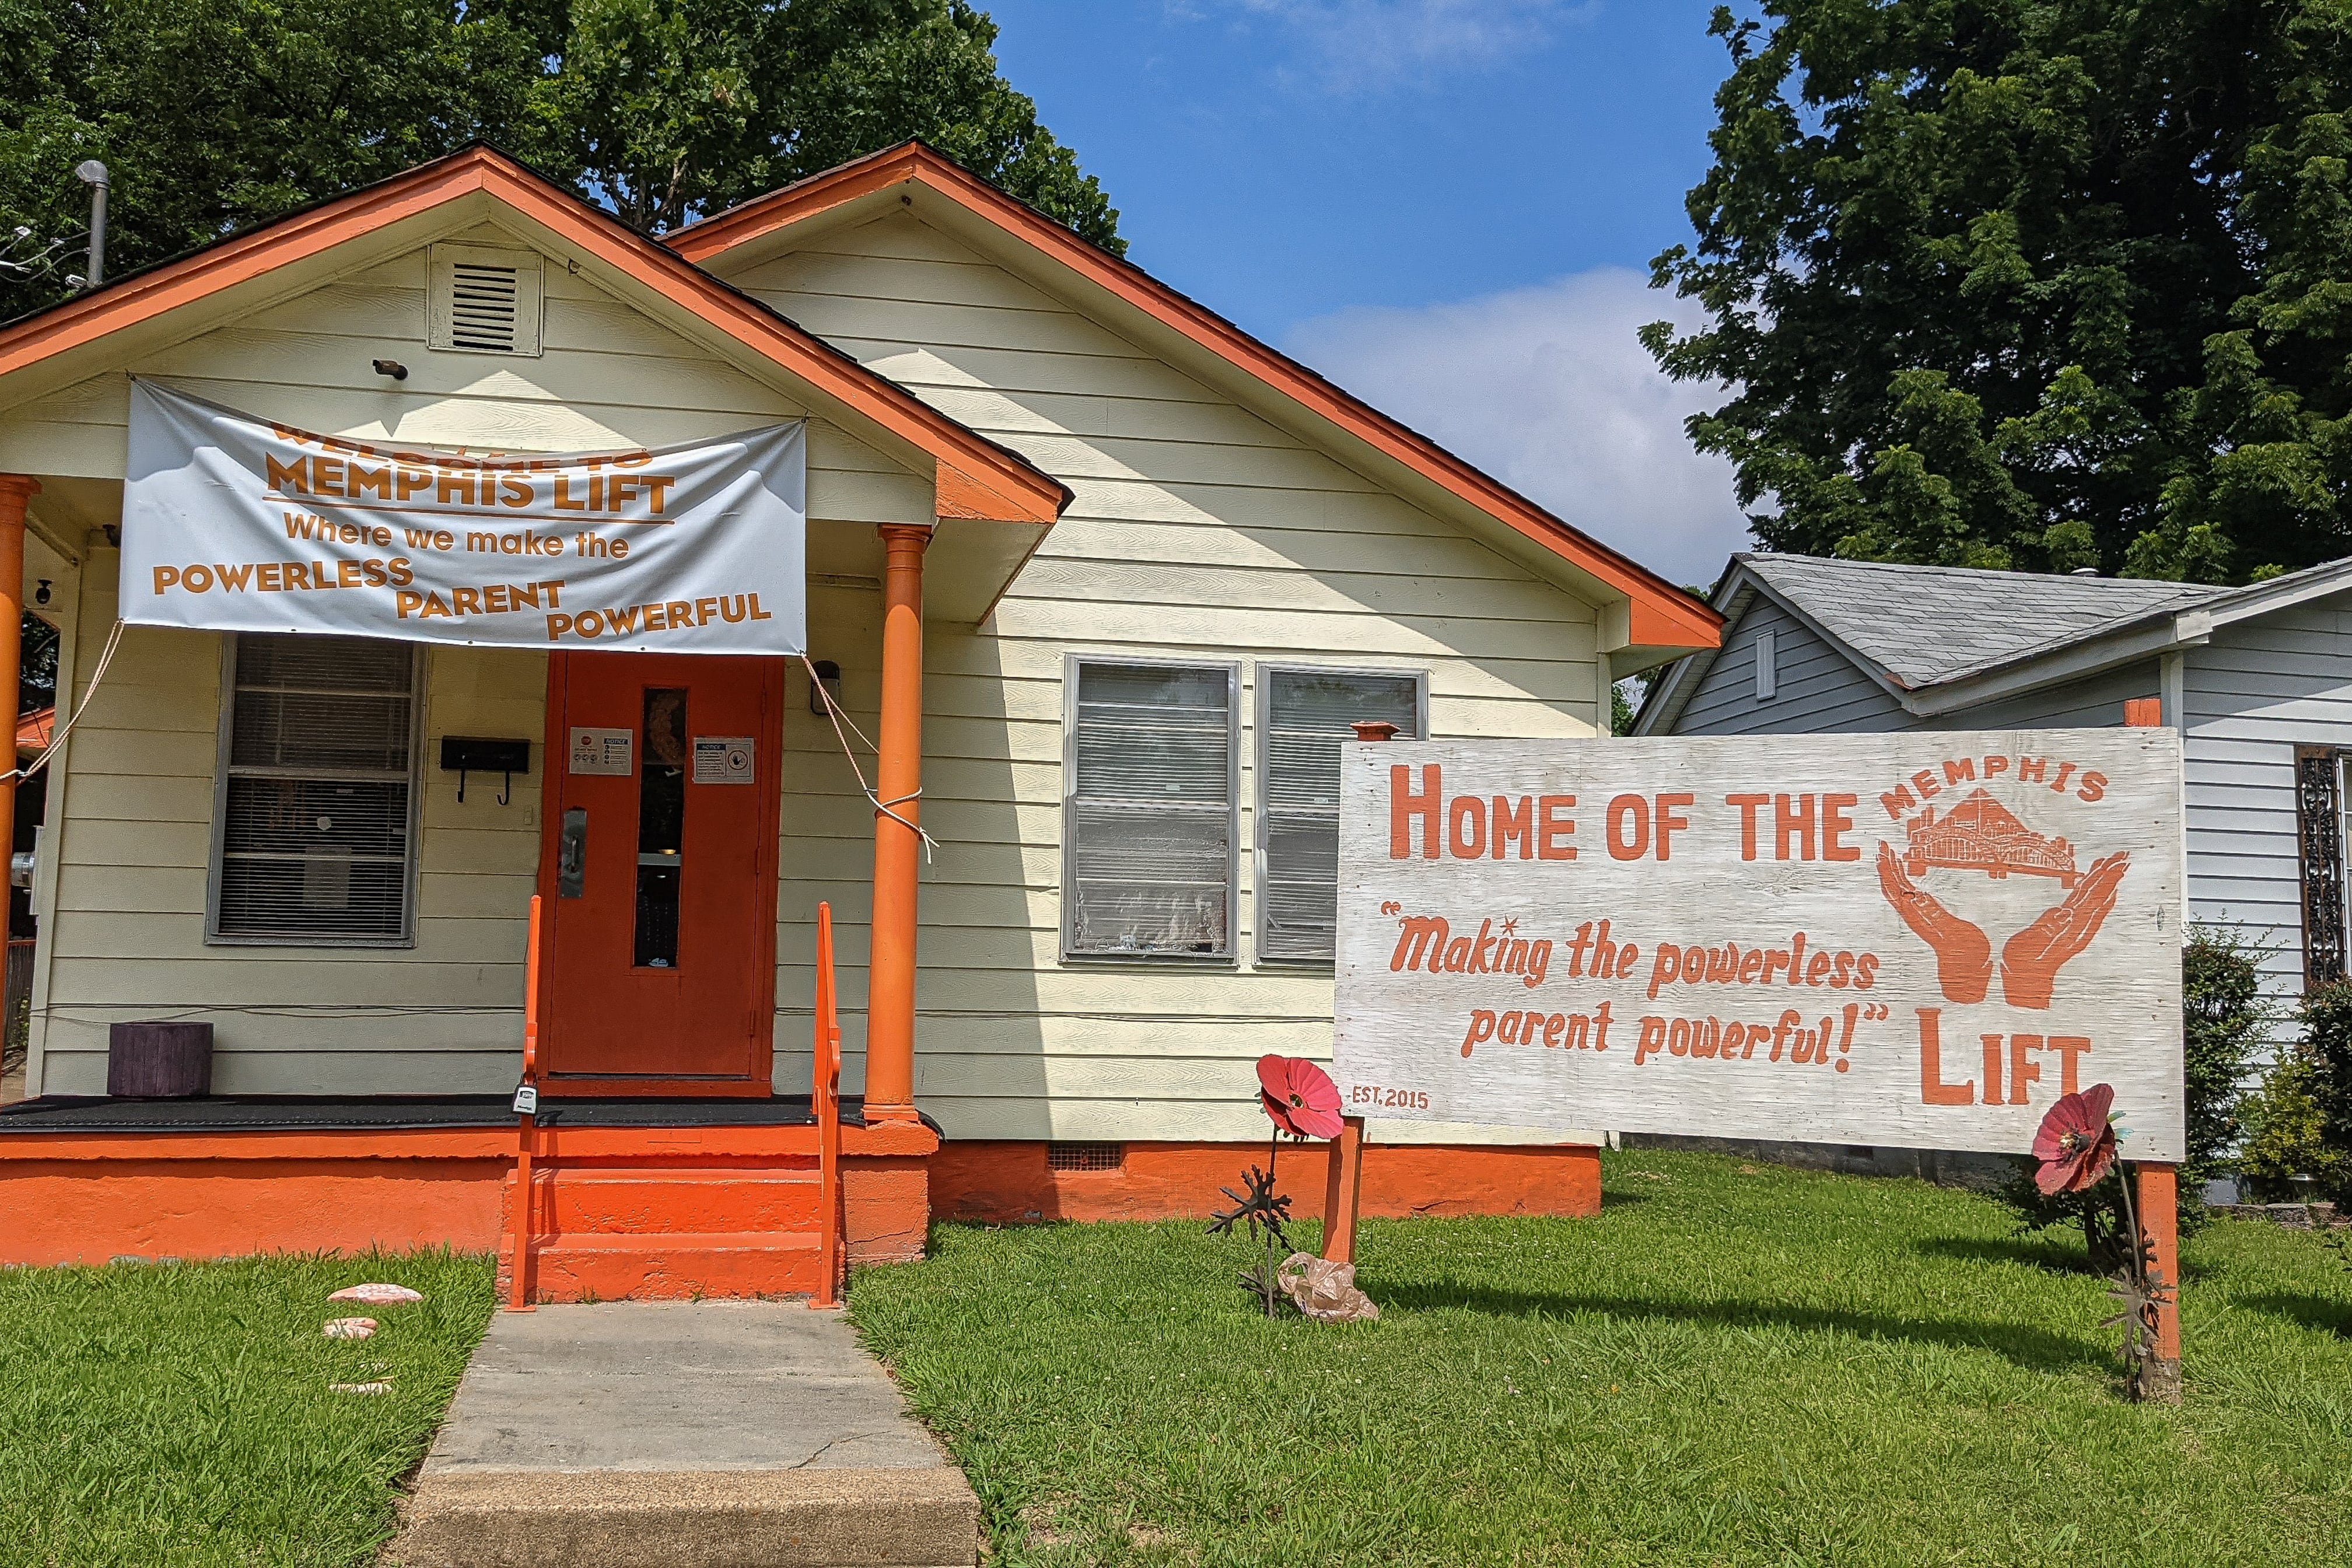 An orange and white home sits in a North Memphis neighborhood with a sign in front of it that says, “Home of The Memphis Lift: Making the powerless parent powerful!”